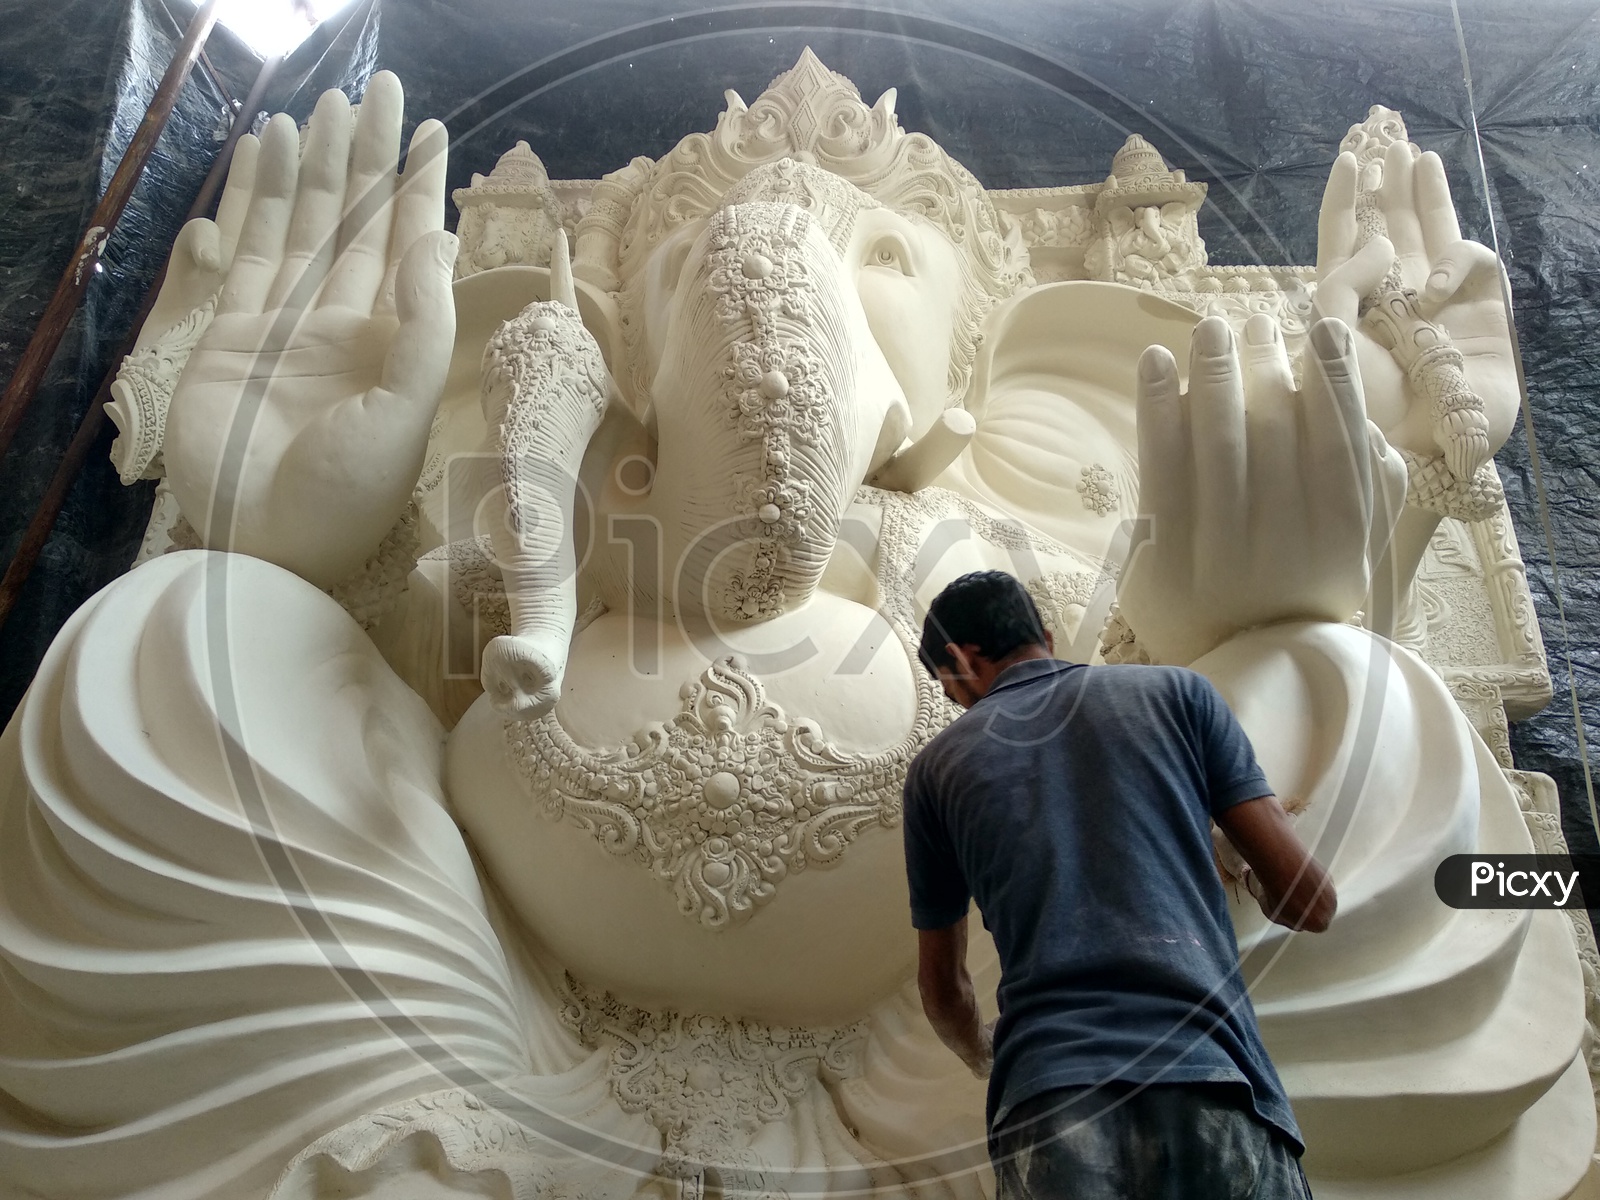 Prepartion of Ganesh Idol for Ganesh Chathurthi. Final Finishing of Idol and ready to paint